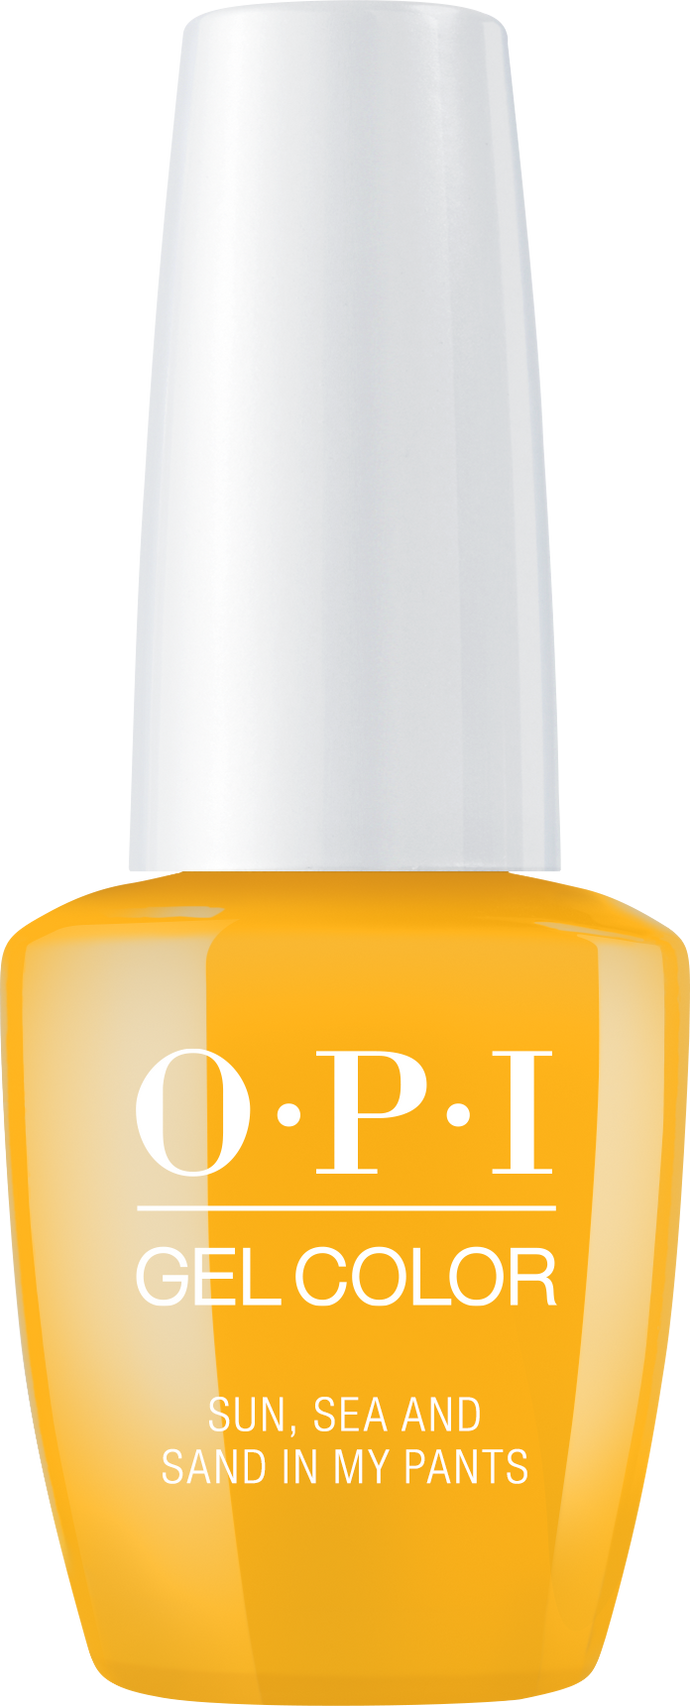 OPI OPI GelColor - Sun, Sea, and Sand in My Pants 0.5 oz - #GCL23 - Sleek Nail